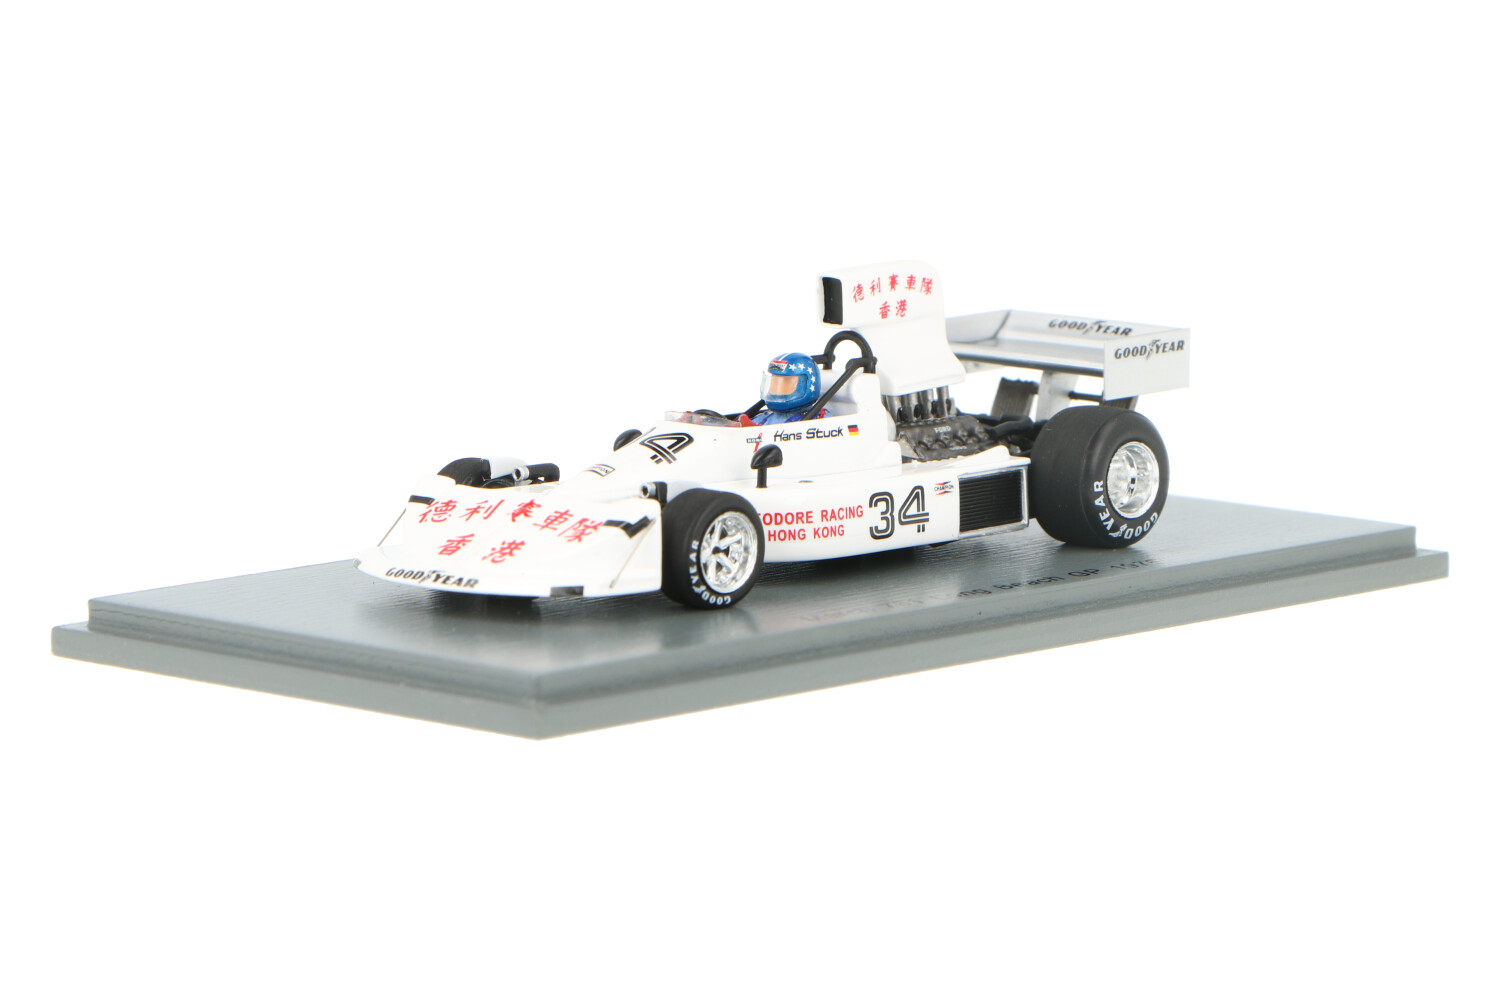 March-761-S5369_13159580006953698March-761-S5369_Houseofmodelcars_.jpg